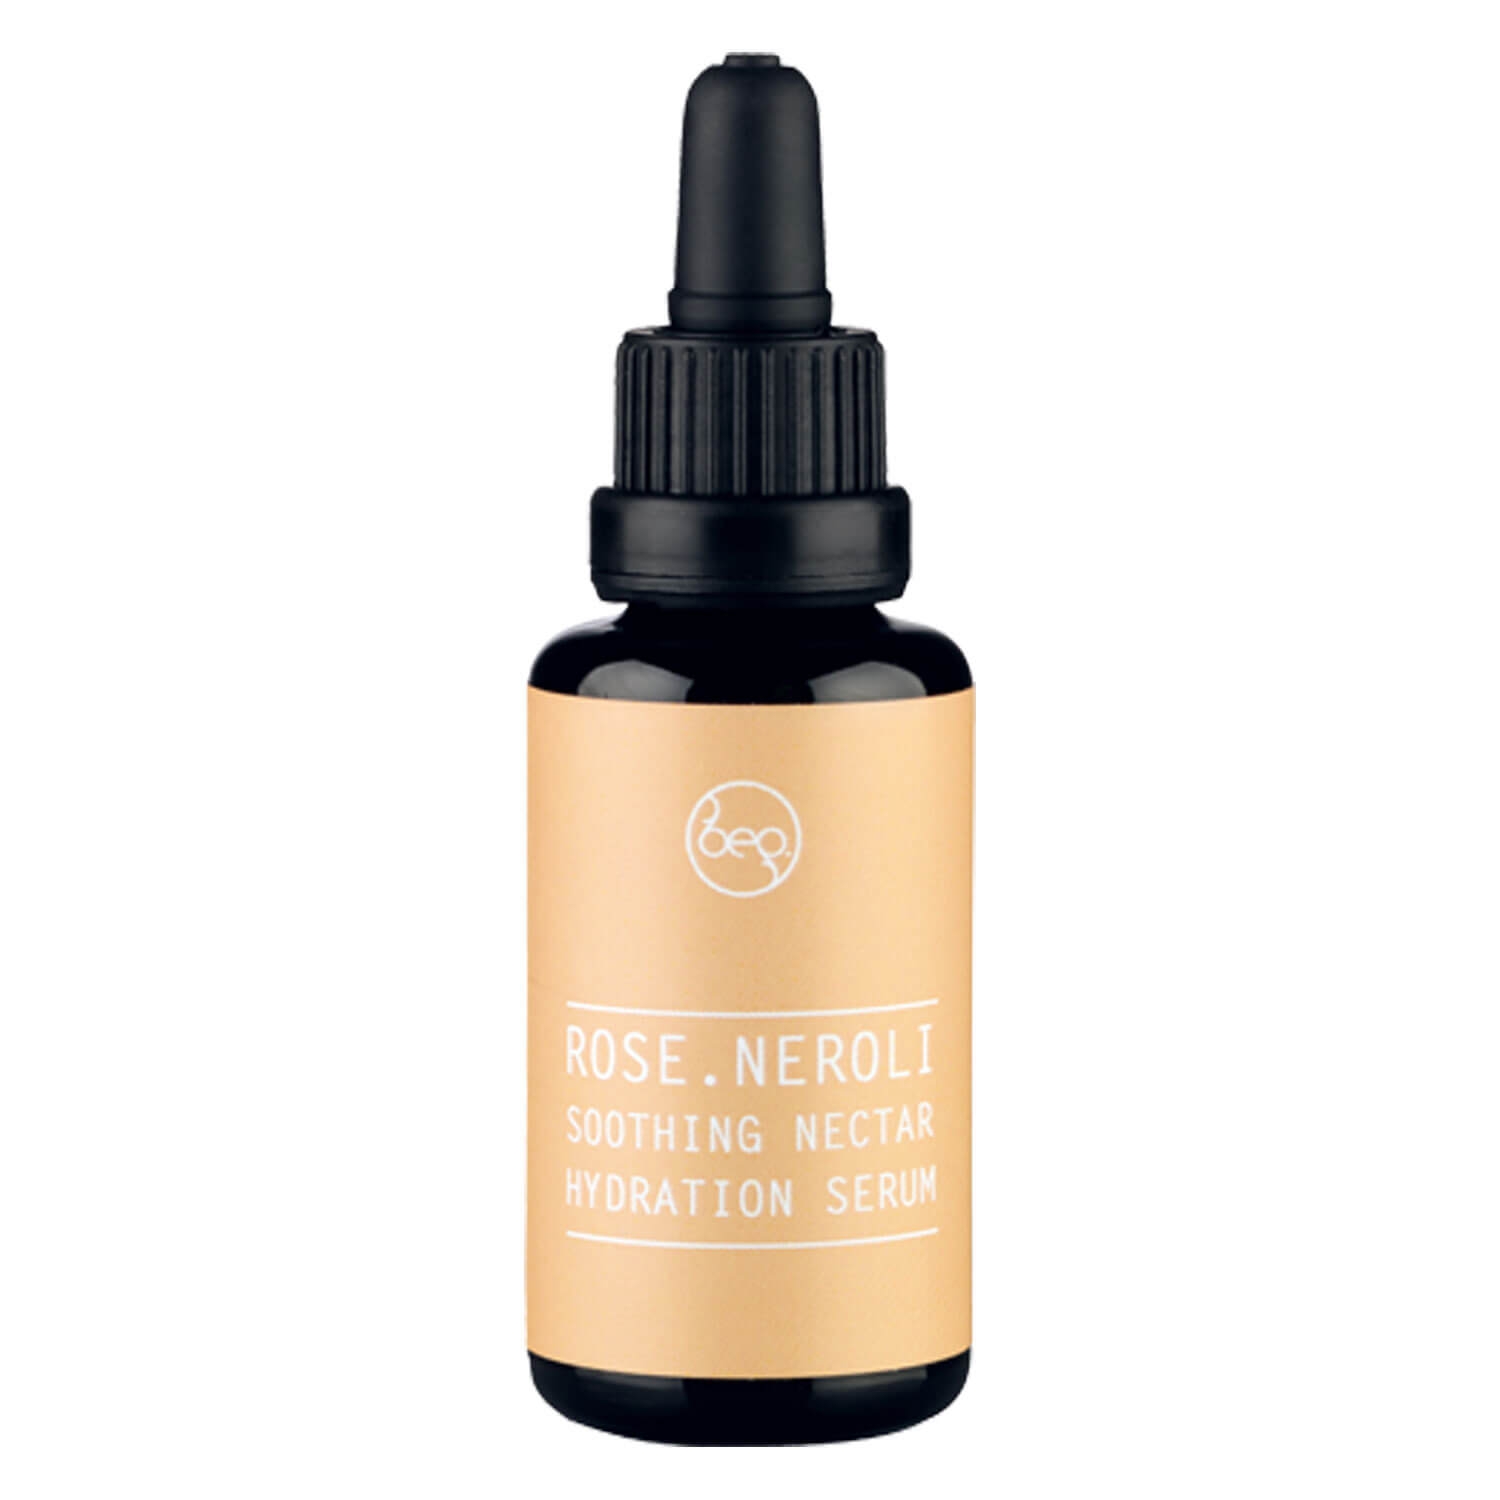 Product image from bepure - Face Oil SOOTHING NECTAR Hydration Serum